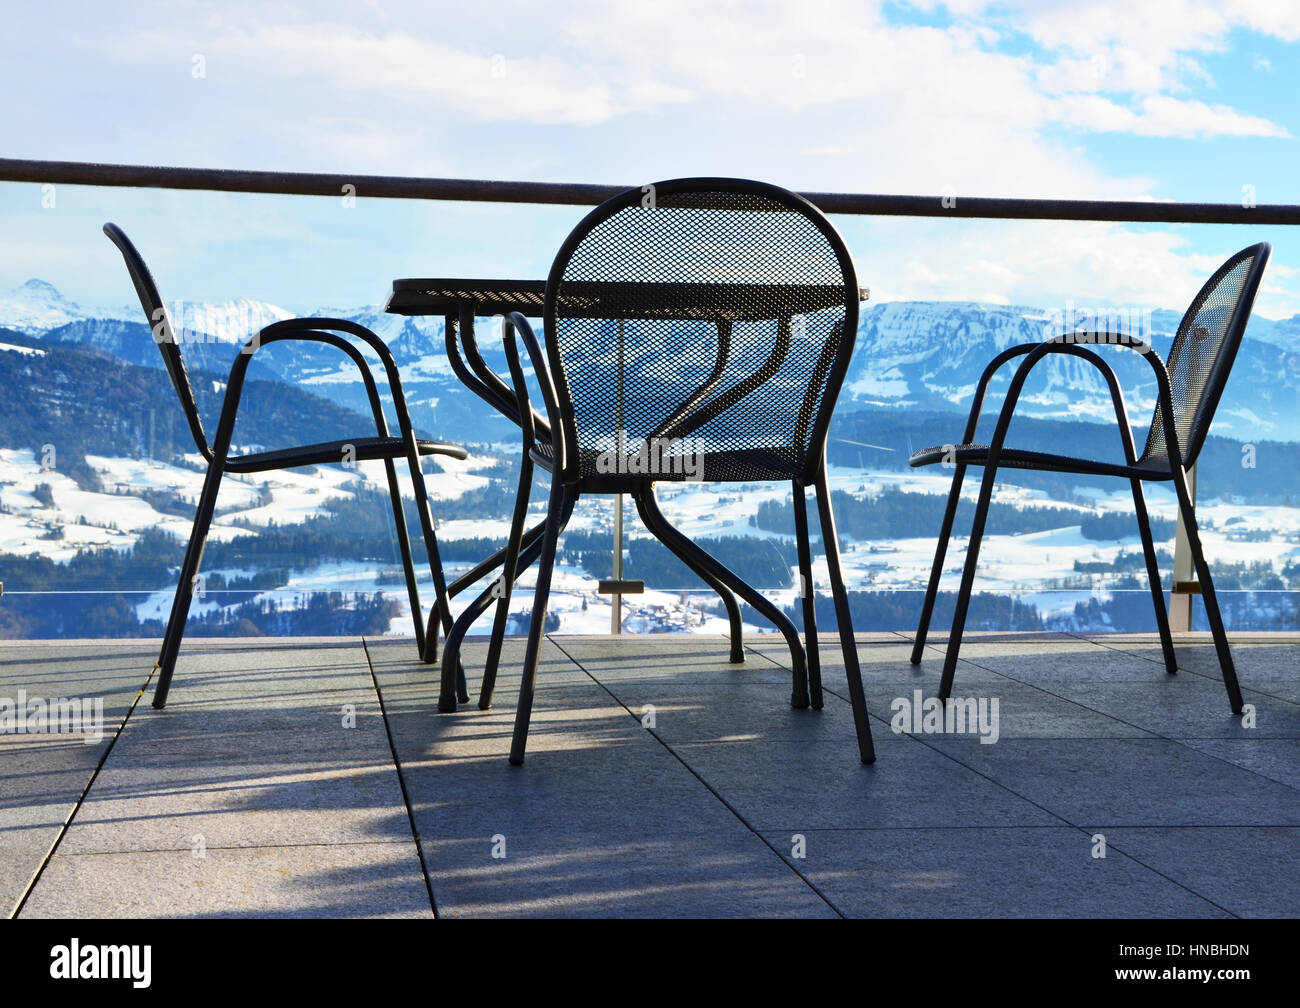 Chairs and Table with view of Allgaeu Alps (Allgäu Alps), as seen from Sulzberg, Vorarlberg, Austria Stock Photo